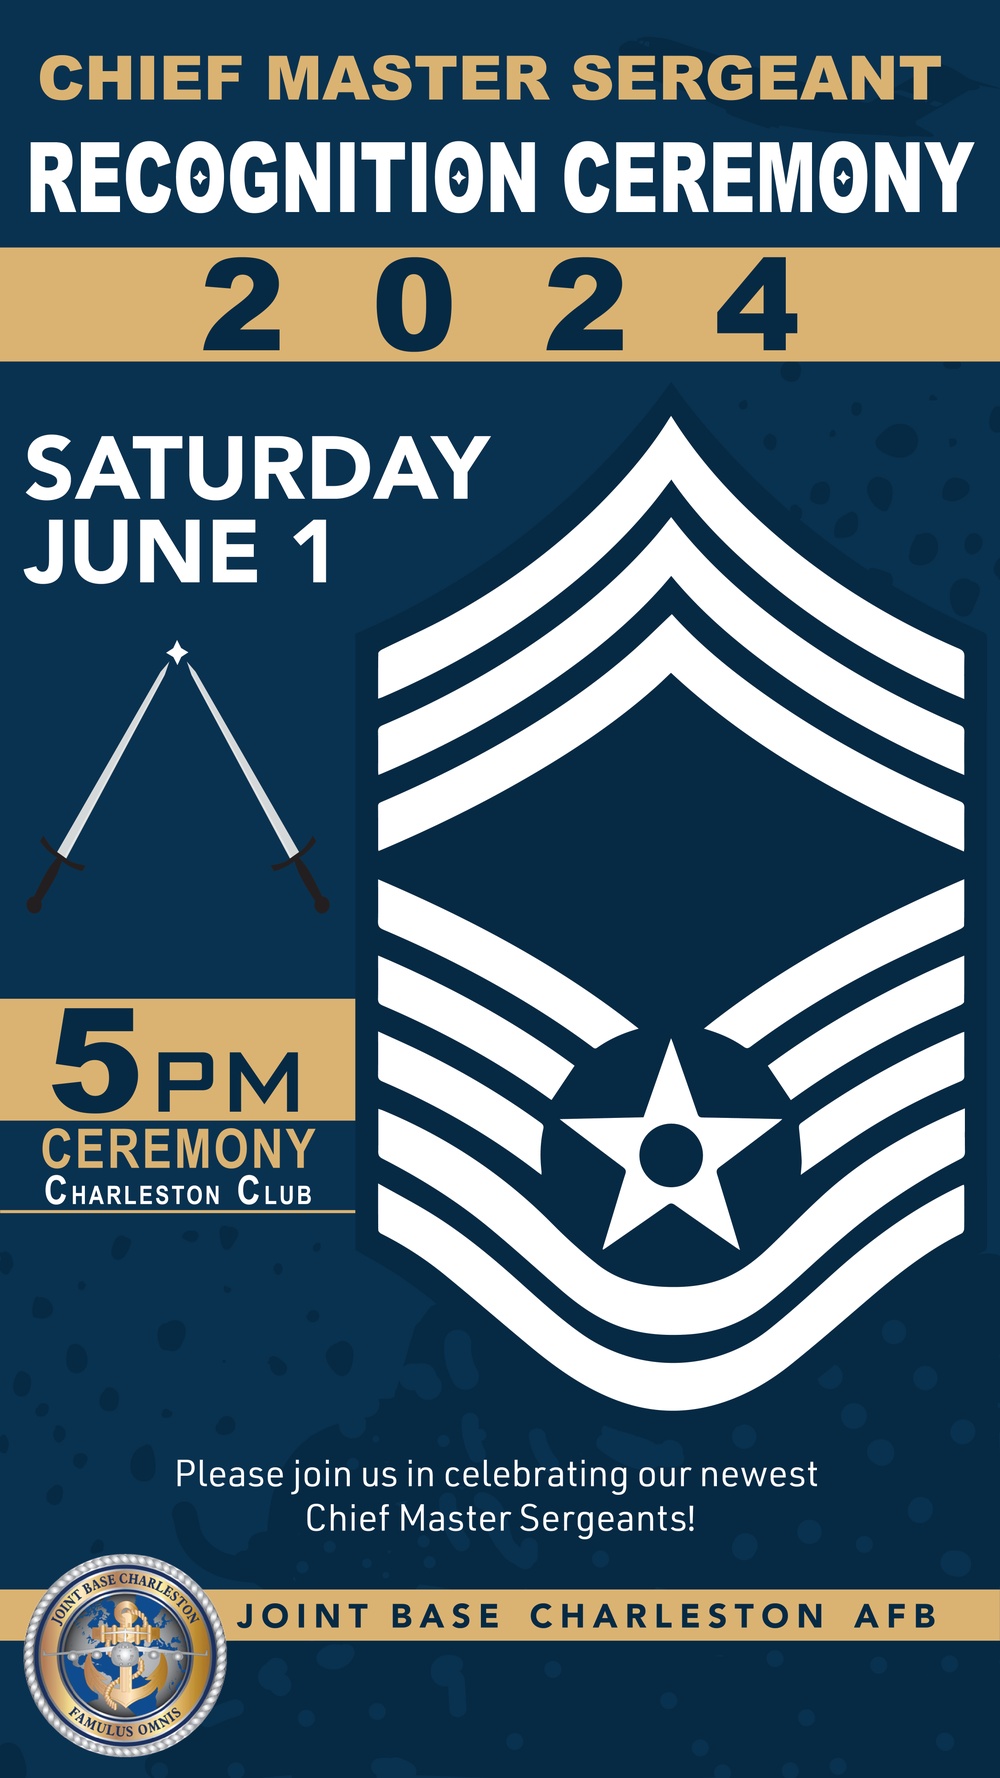 2024 Chief Master Sergeant Recognition Ceremony